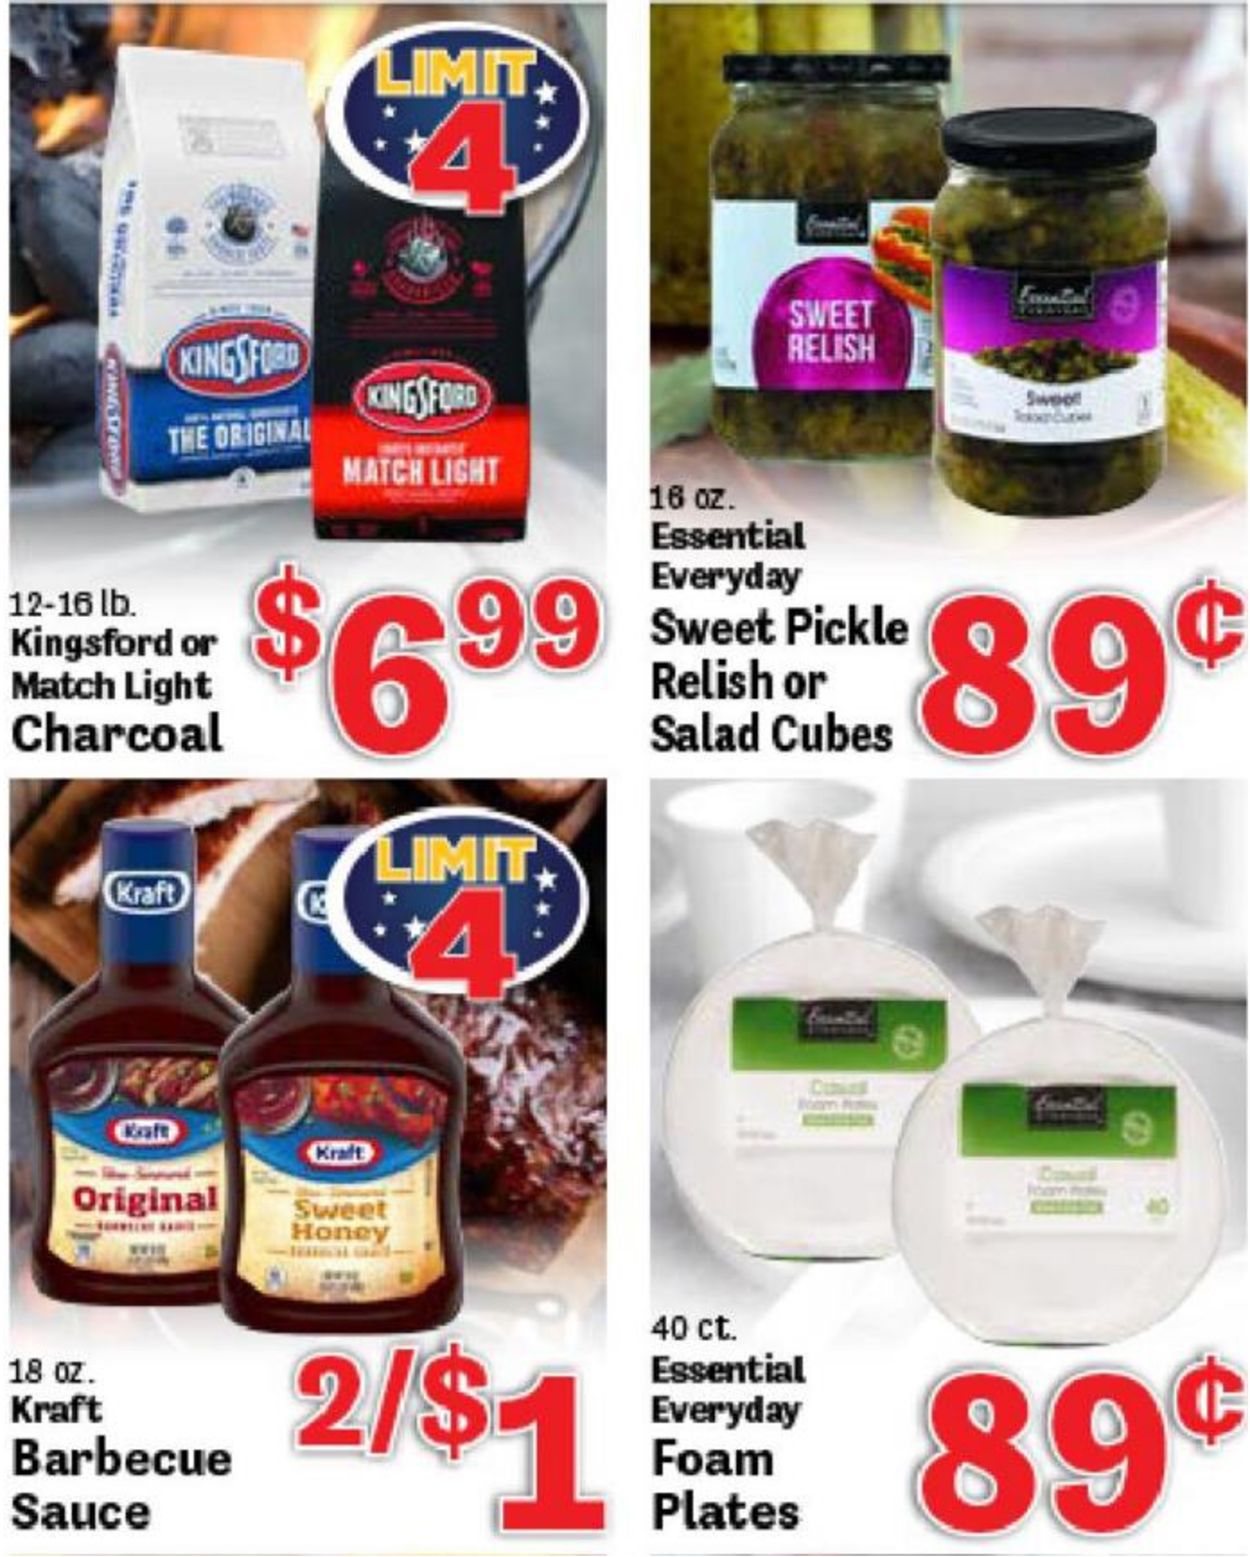 Food Depot Ad from 05/23/2022